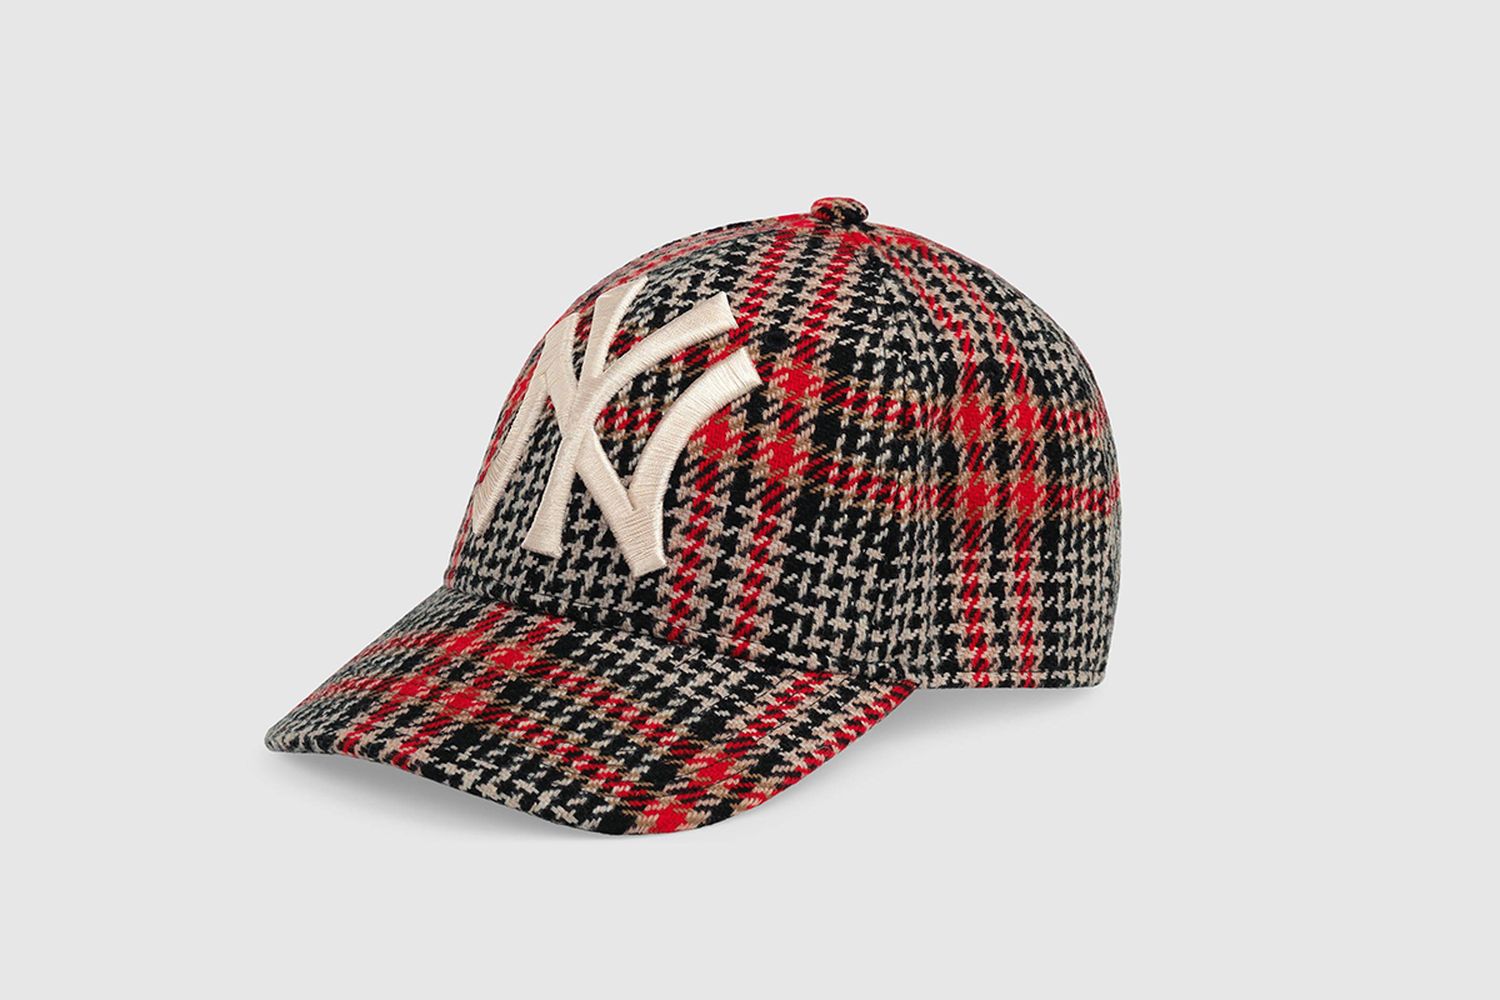 Gucci x NY Yankees Capsule: Where to Buy